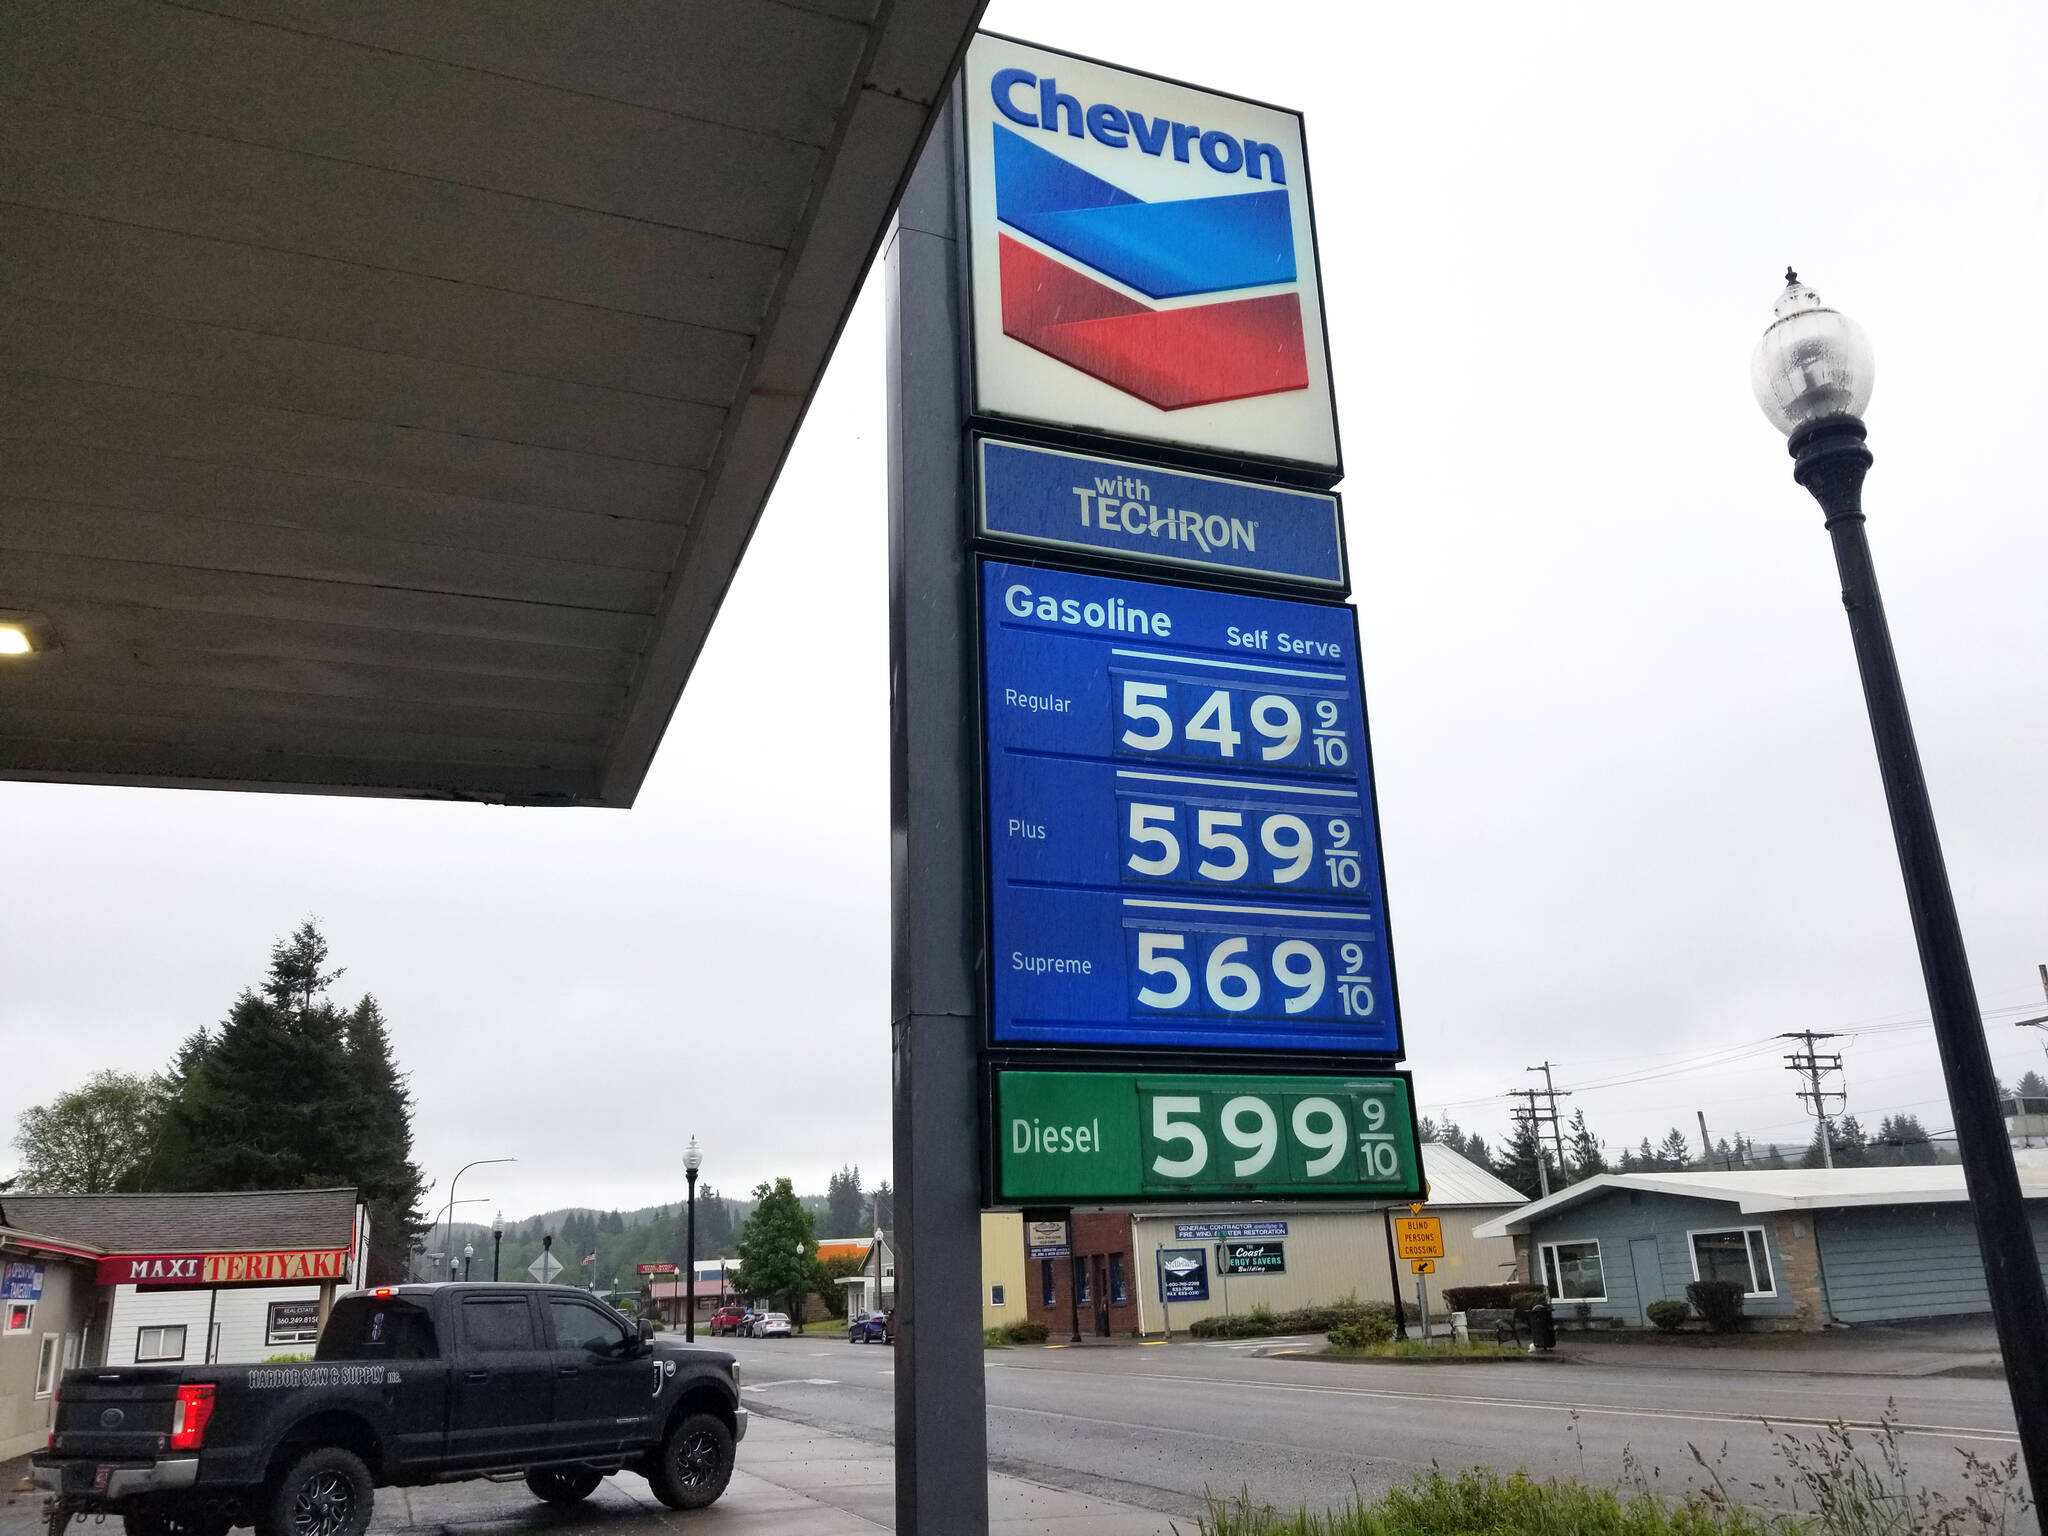 Allen Leister | The Daily World 
While Washington state holds an average gas price of $5.40, it’s not uncommon to see even higher prices across Grays Harbor County, such as at the Chevron station in Cosmopolis.